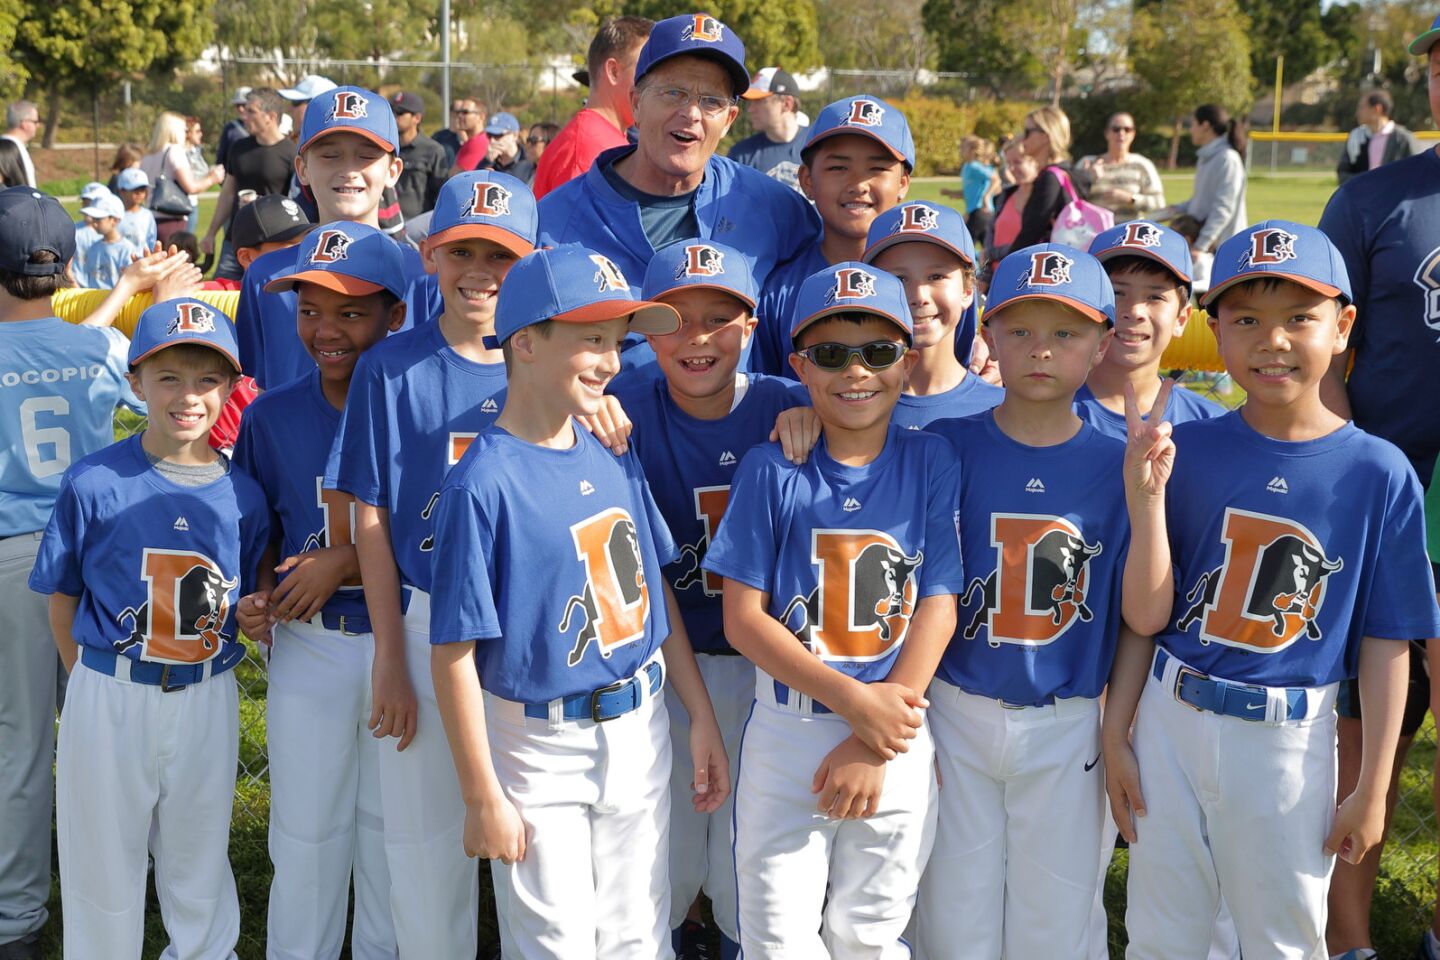 Bulls at the Del Mar Little League Opening Day